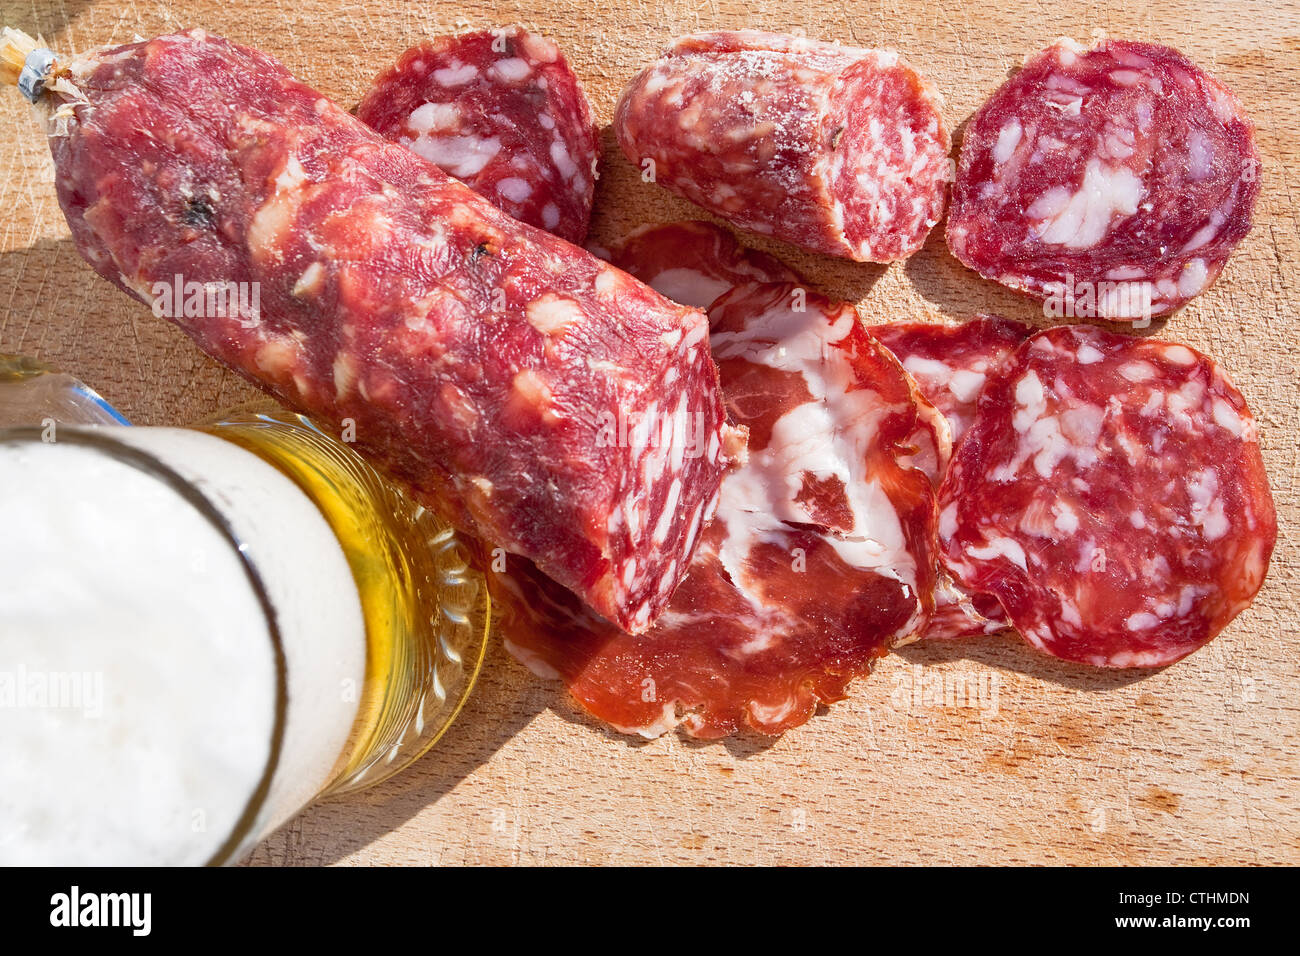 italian salami and glass of beer on wooden board Stock Photo